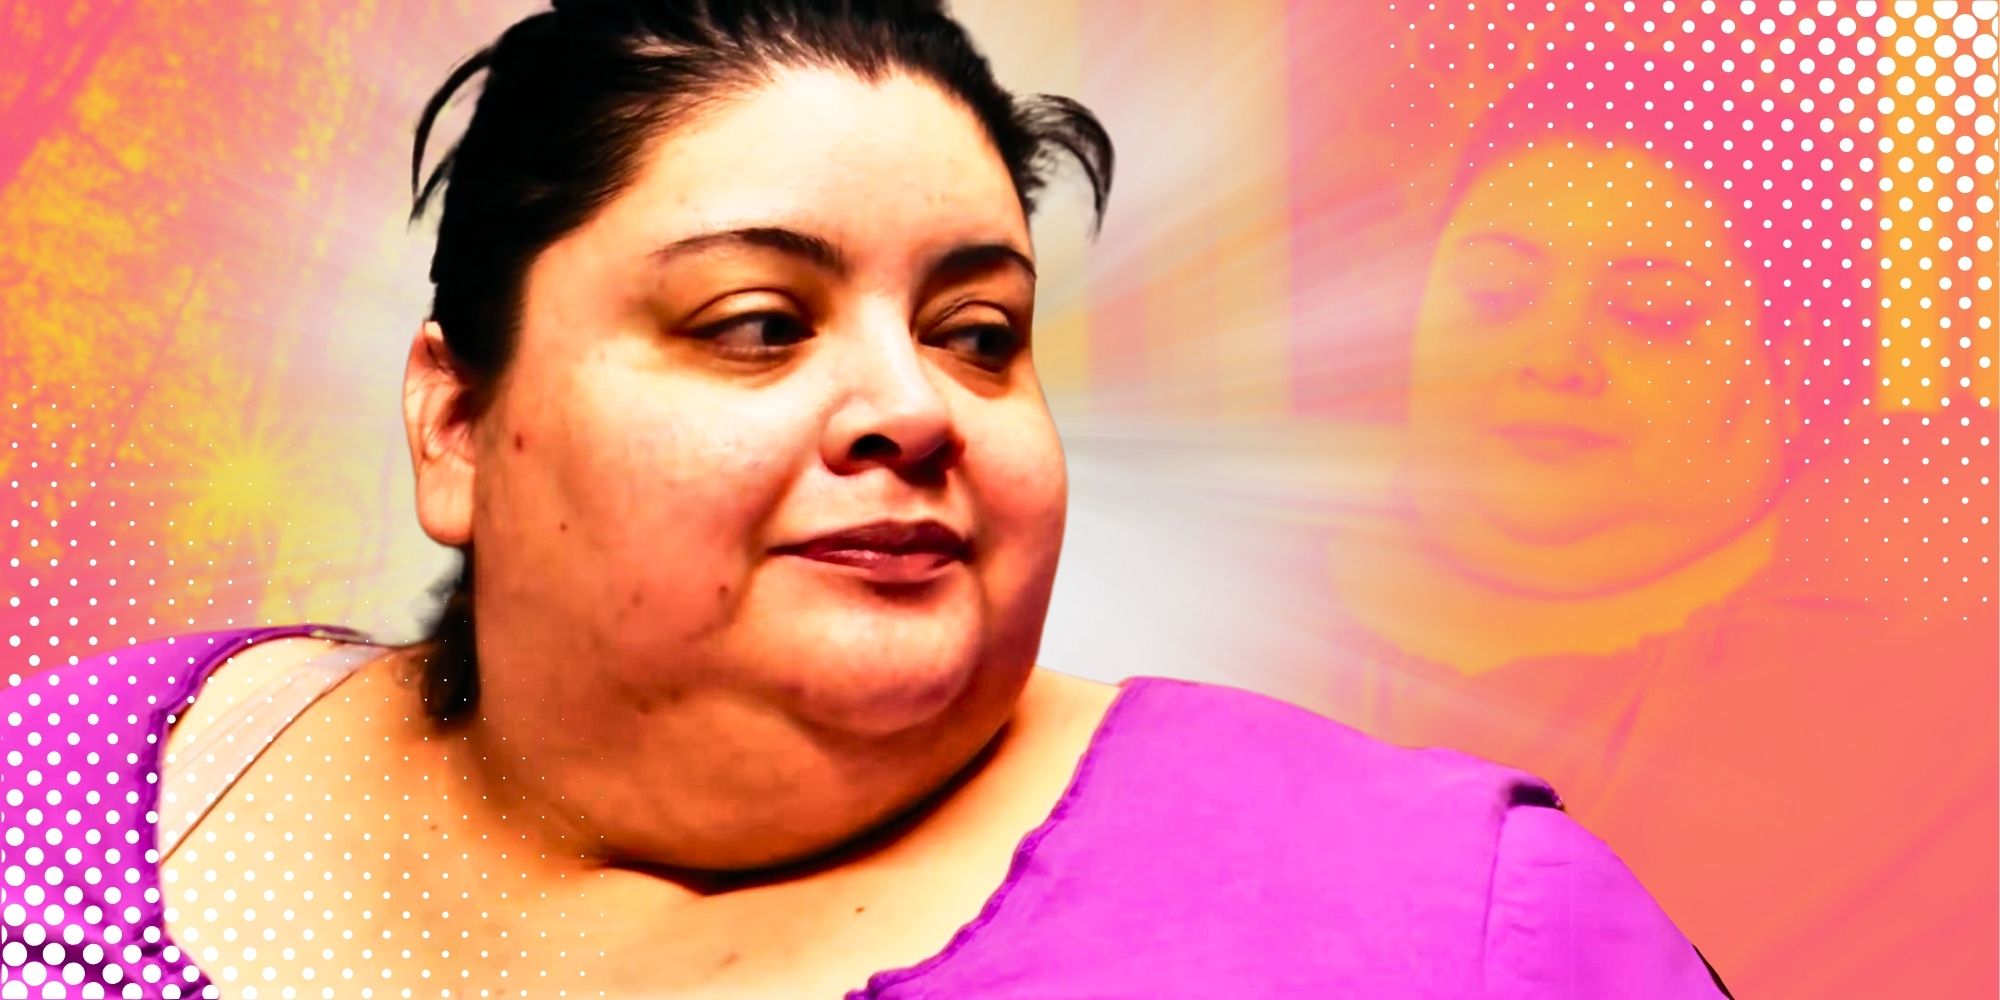 My 600Lb Life What Happened To Karina Garcia & Her Weight Loss